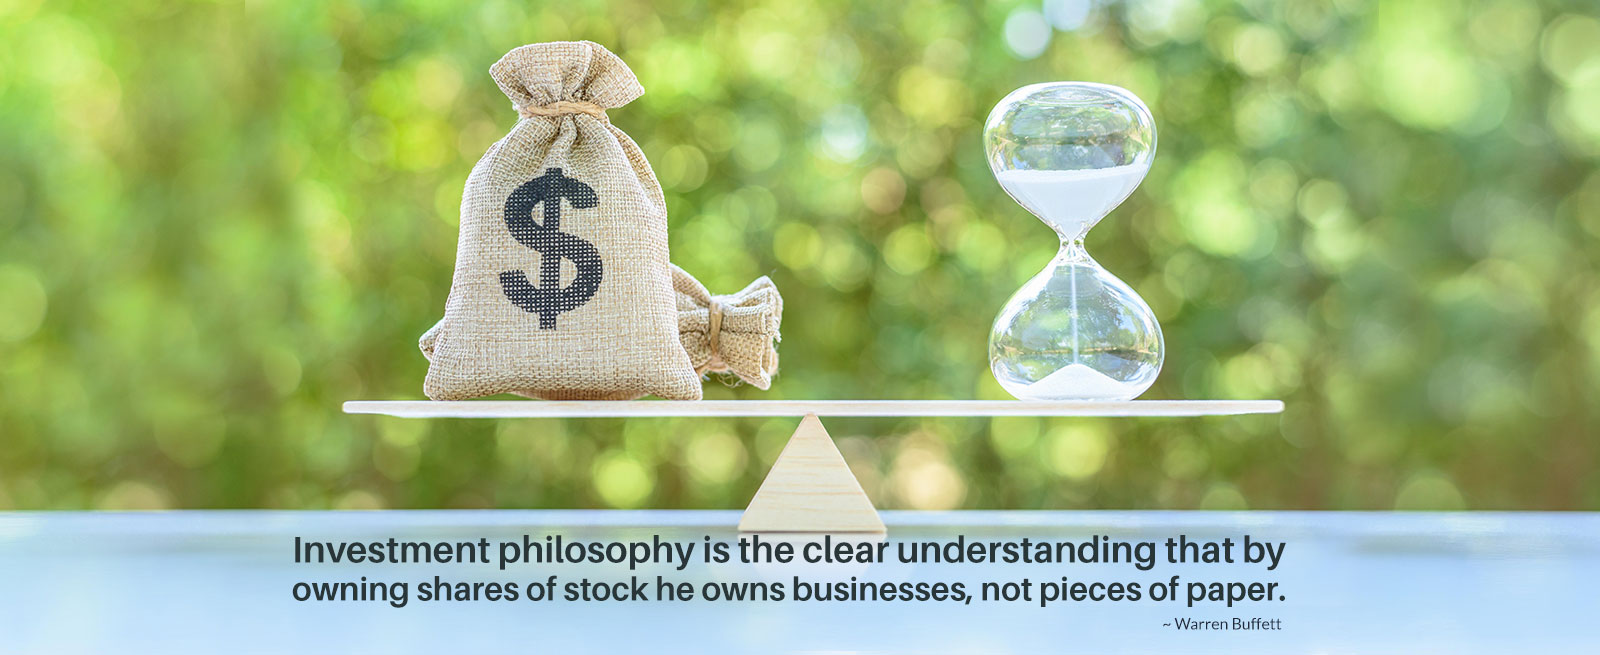 investment philosophy